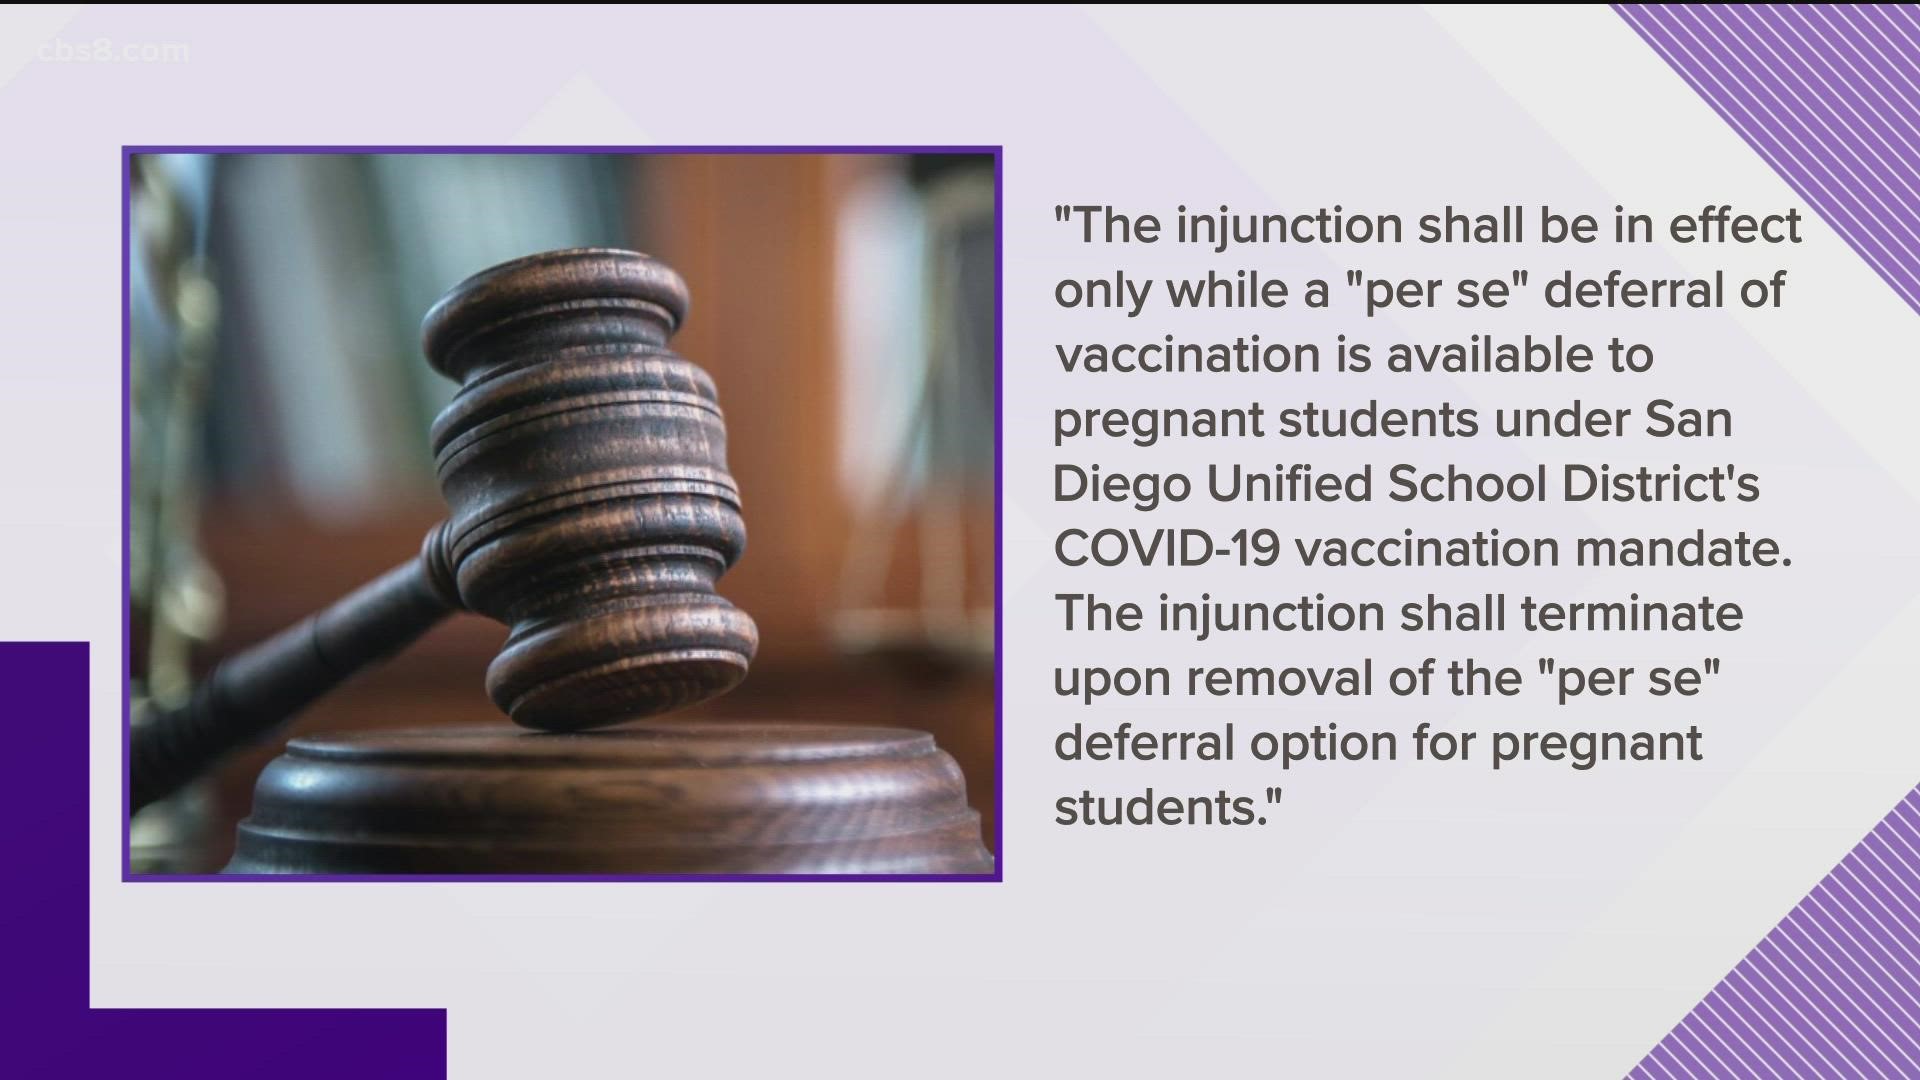 A family from Scripps Ranch High School that sued the SDUSD over its vaccine mandate based on religious beliefs received an emergency injunction.